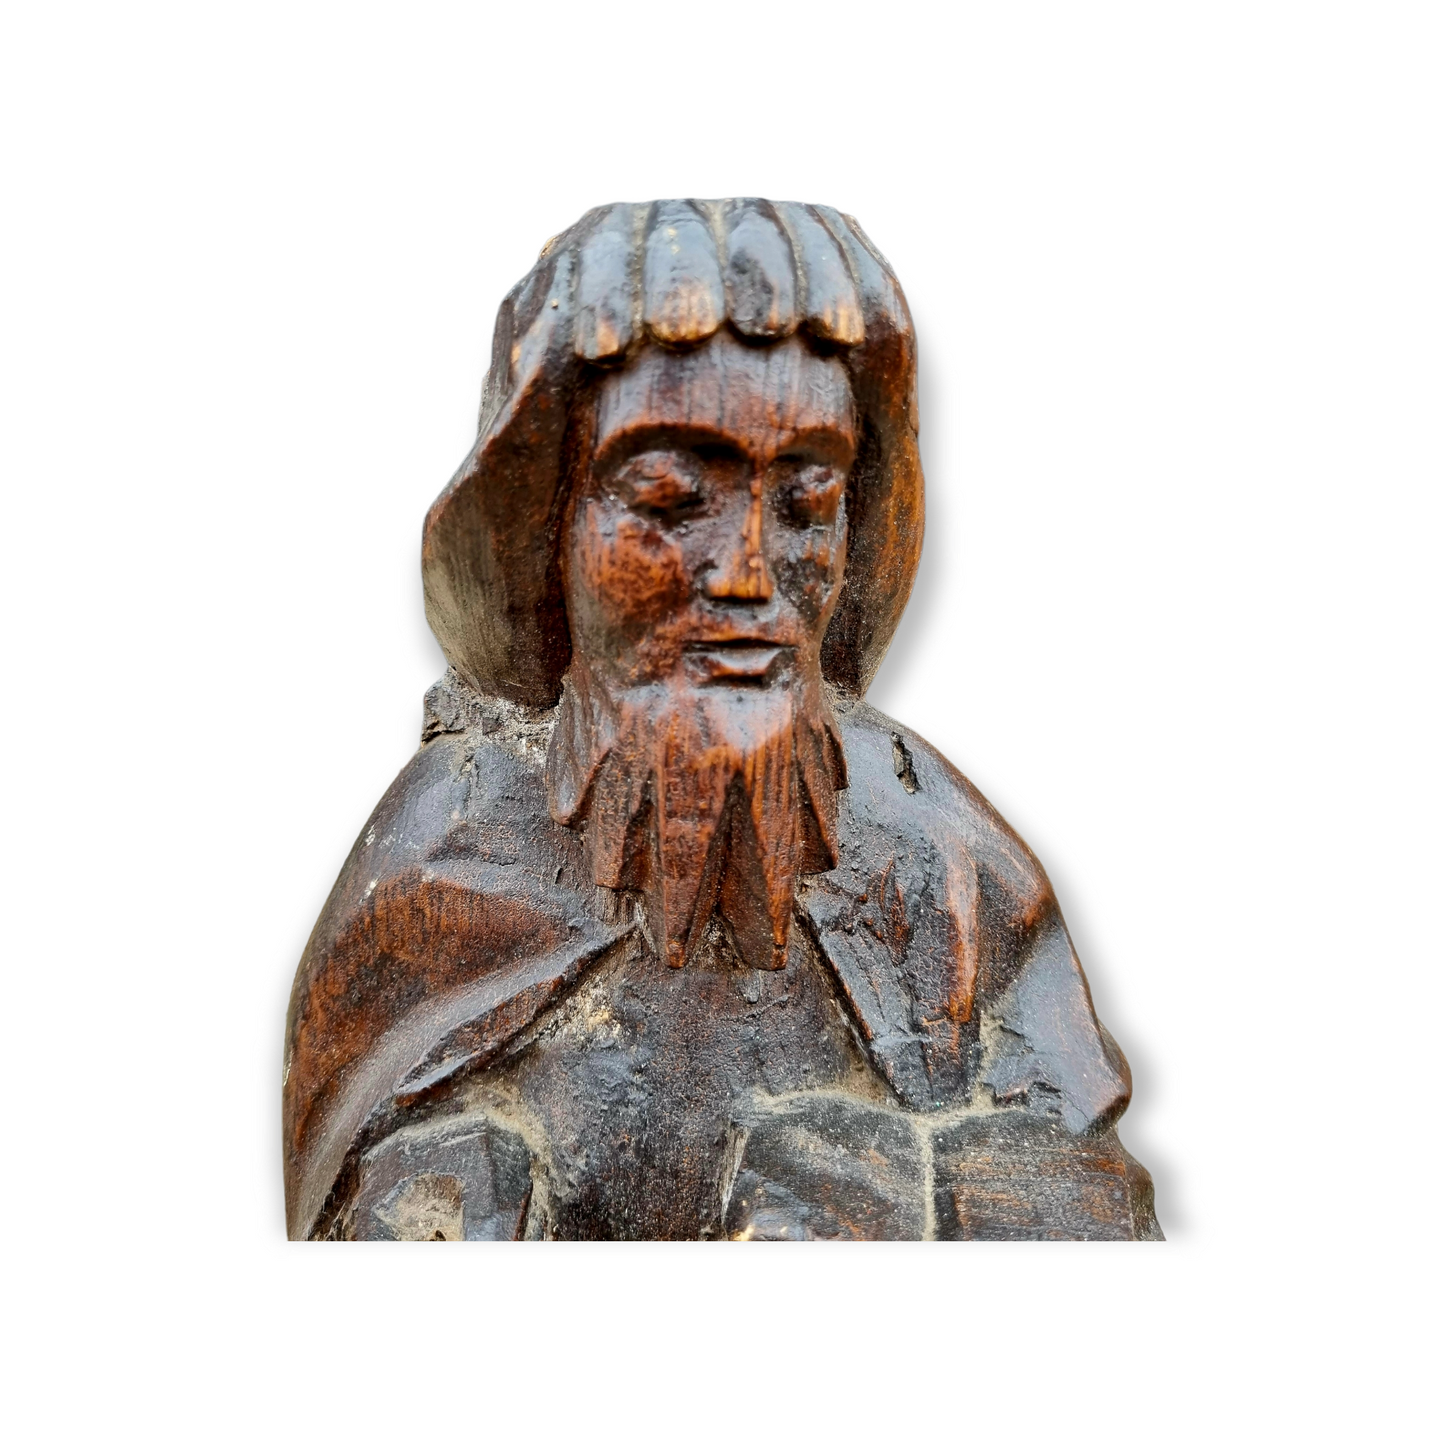 15th Century English Antique Carved Oak Figure of a Saint, Possibly Saint Paul, Attributed to East Anglia